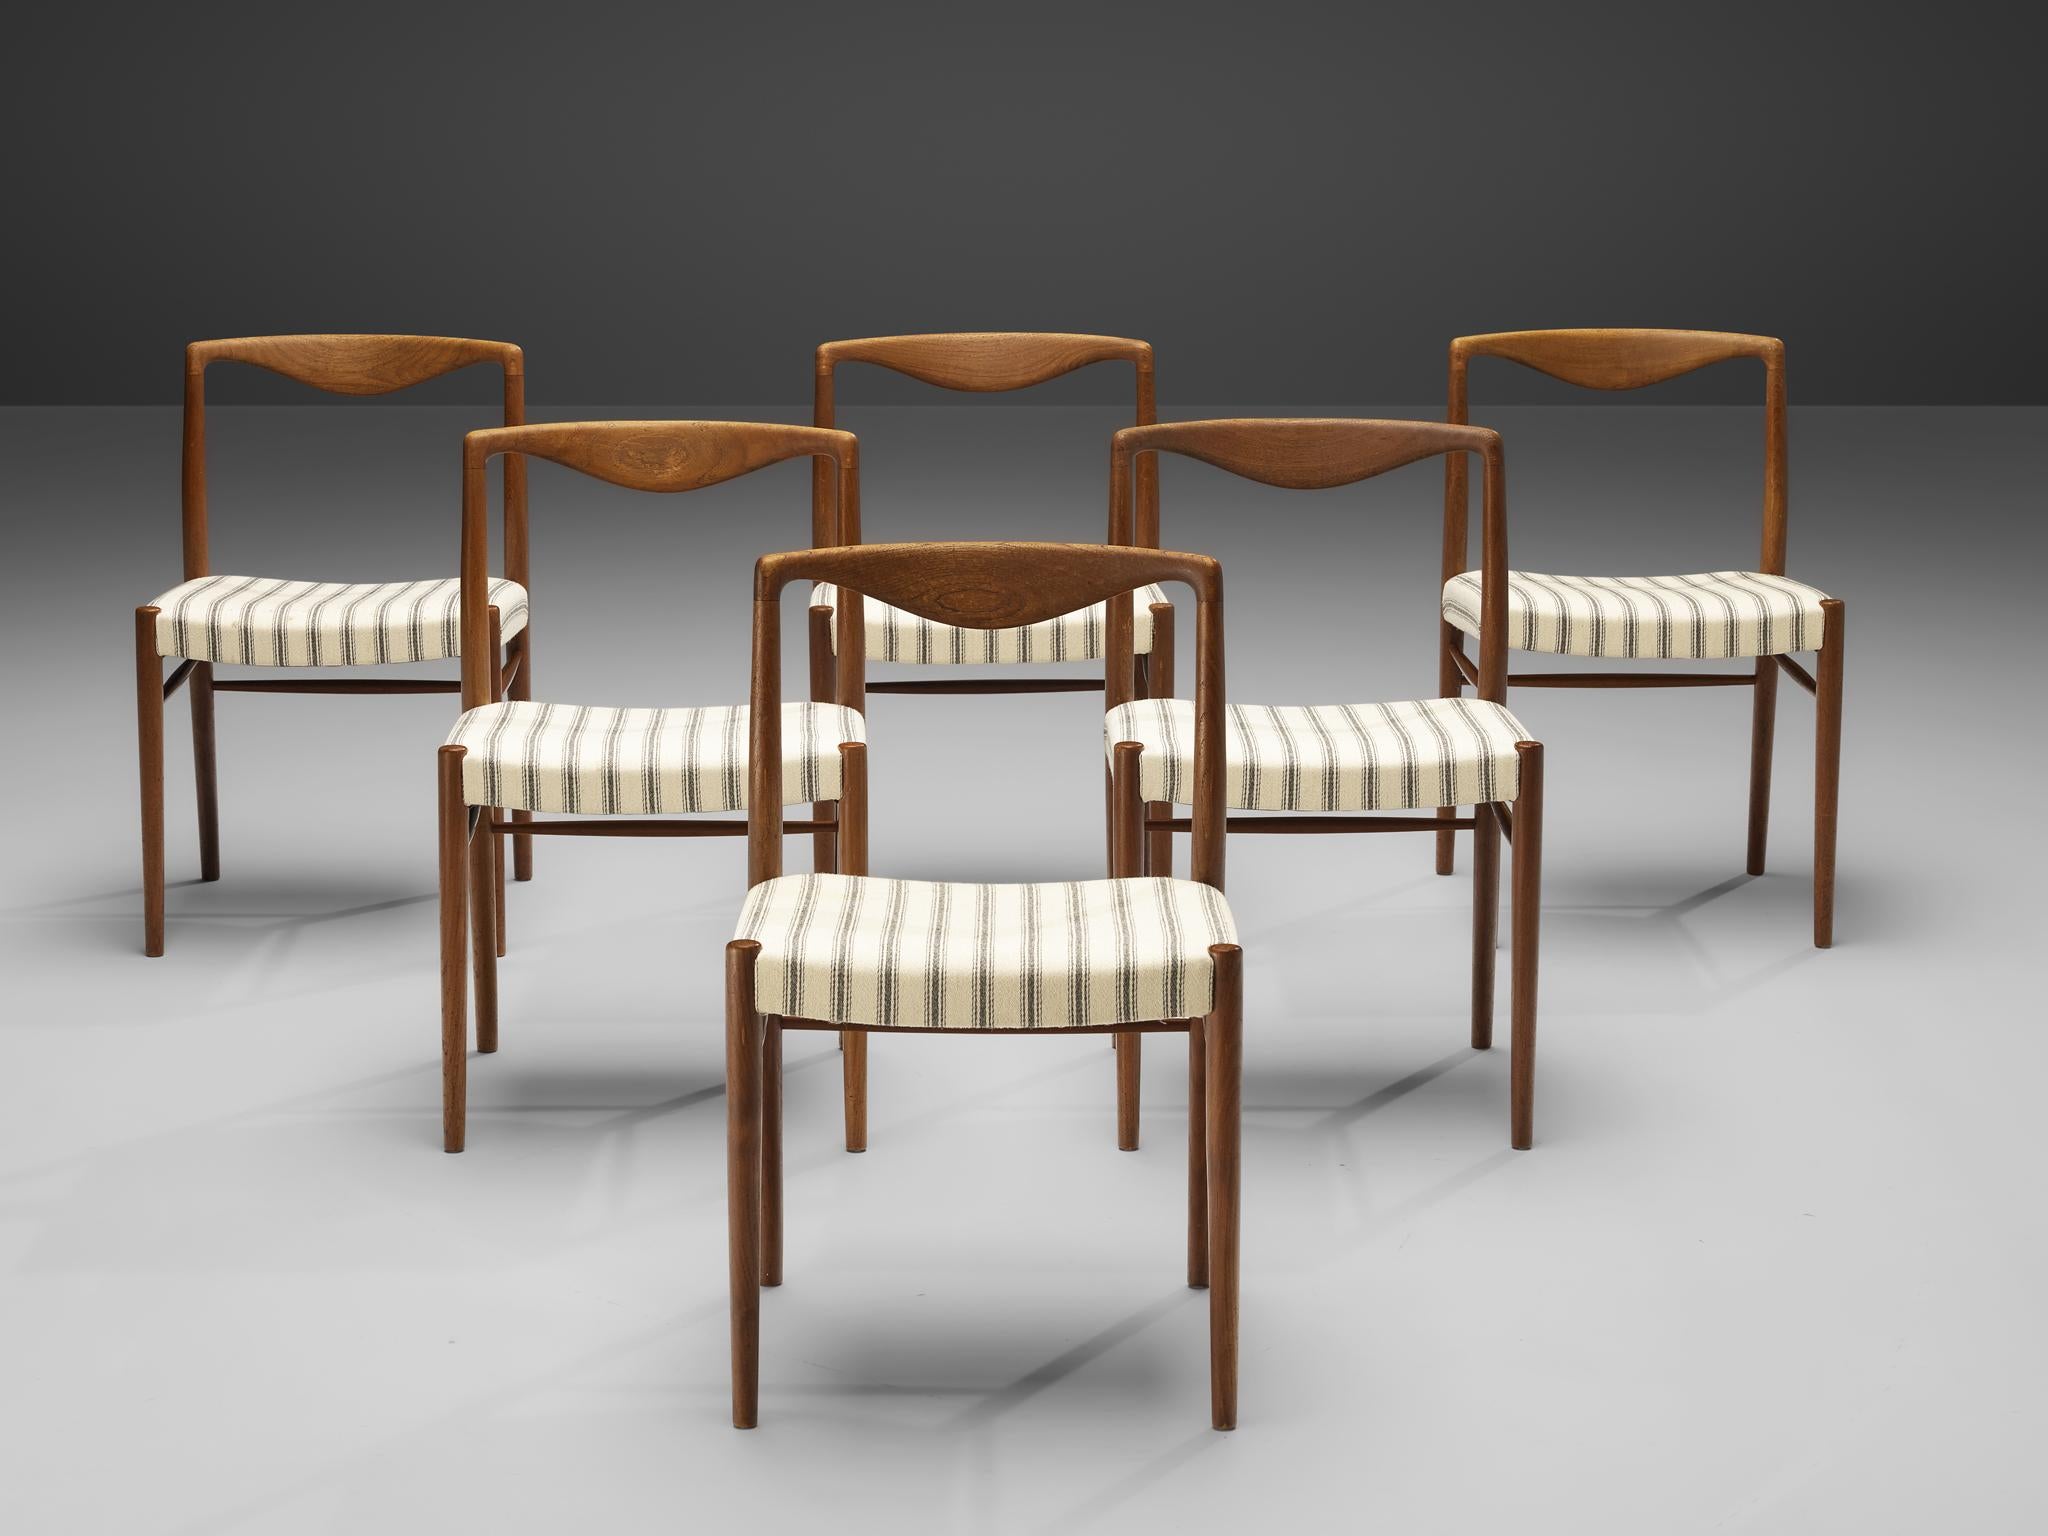 Kai Lyngfeldt Larsen for Soren Willadsen, set of six dining chairs, teak, fabric, Denmark, 1960s.

These elegant, curvy dining chairs show wonderful craftsmanship. The top rail is formed by a sculptural piece of soft teak with a beautiful curve. The